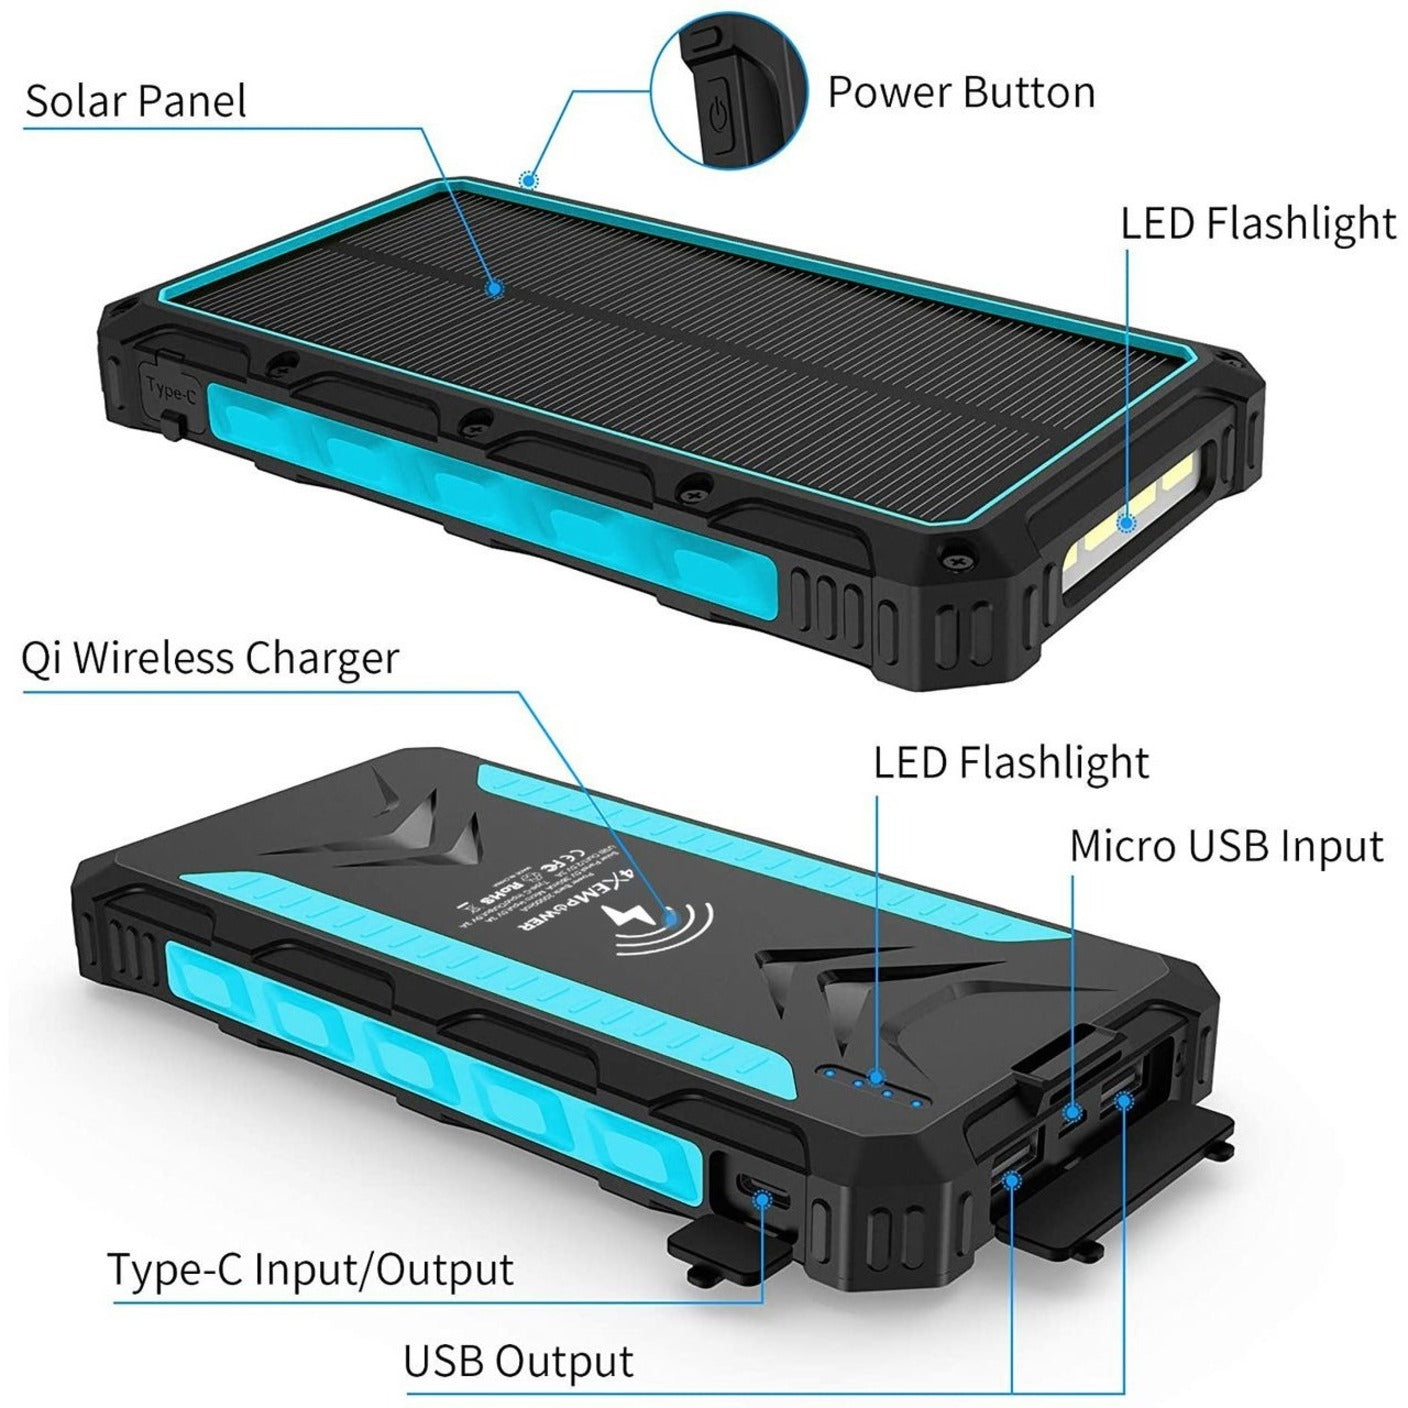 4XEM 4XSOLARPWRBL Mobile Solar Charger (Blue), 20,000mAh Power Bank and Charger